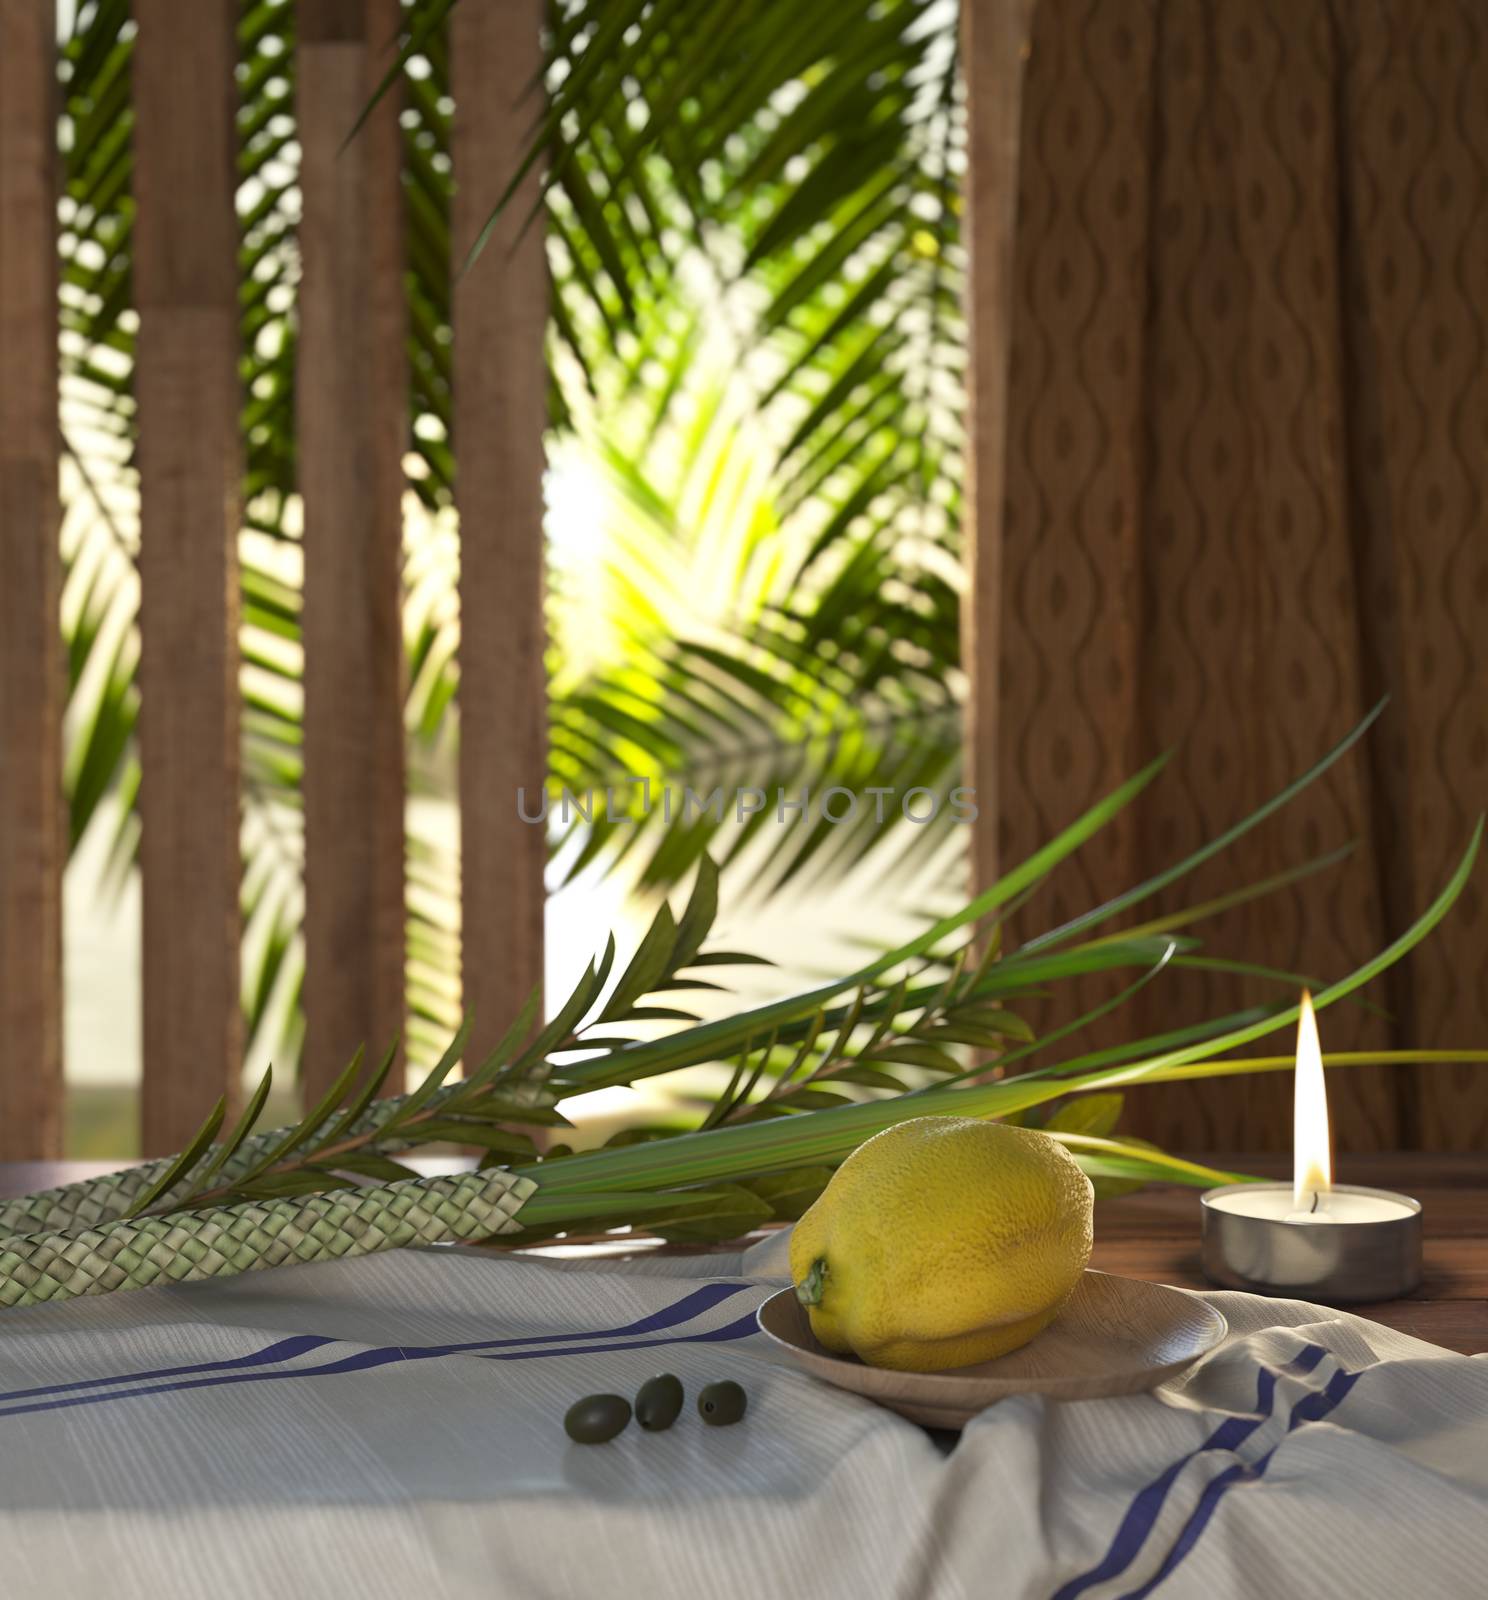 Symbols of the Jewish holiday Sukkot with palm leaves and candle by denisgo